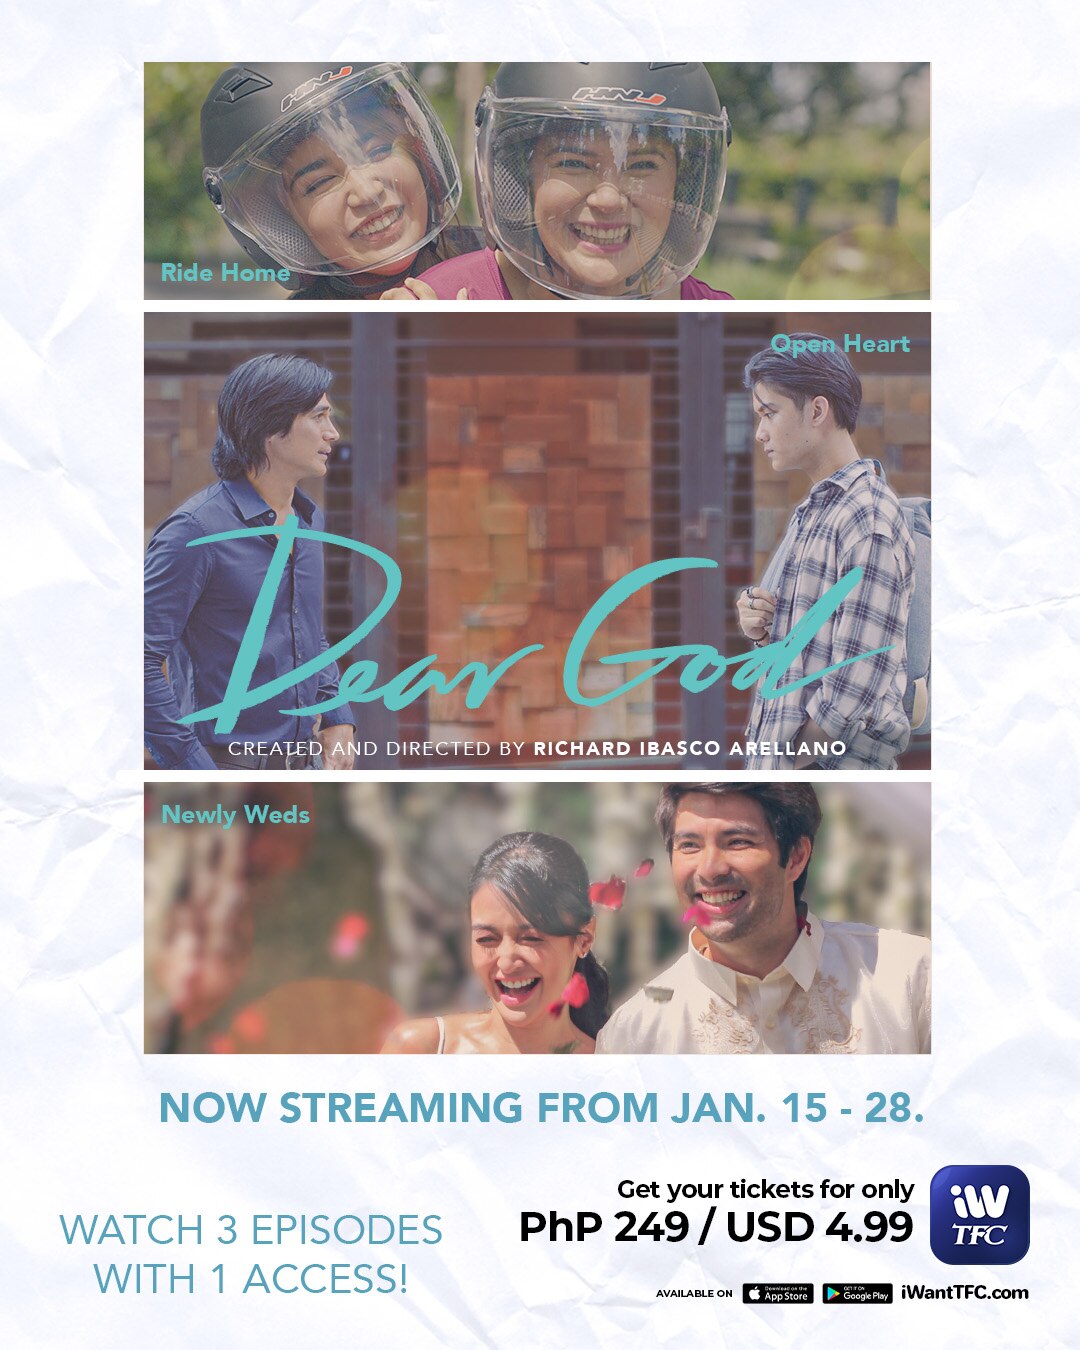 Dear God's first 3 episodes streaming now on iWantTFC